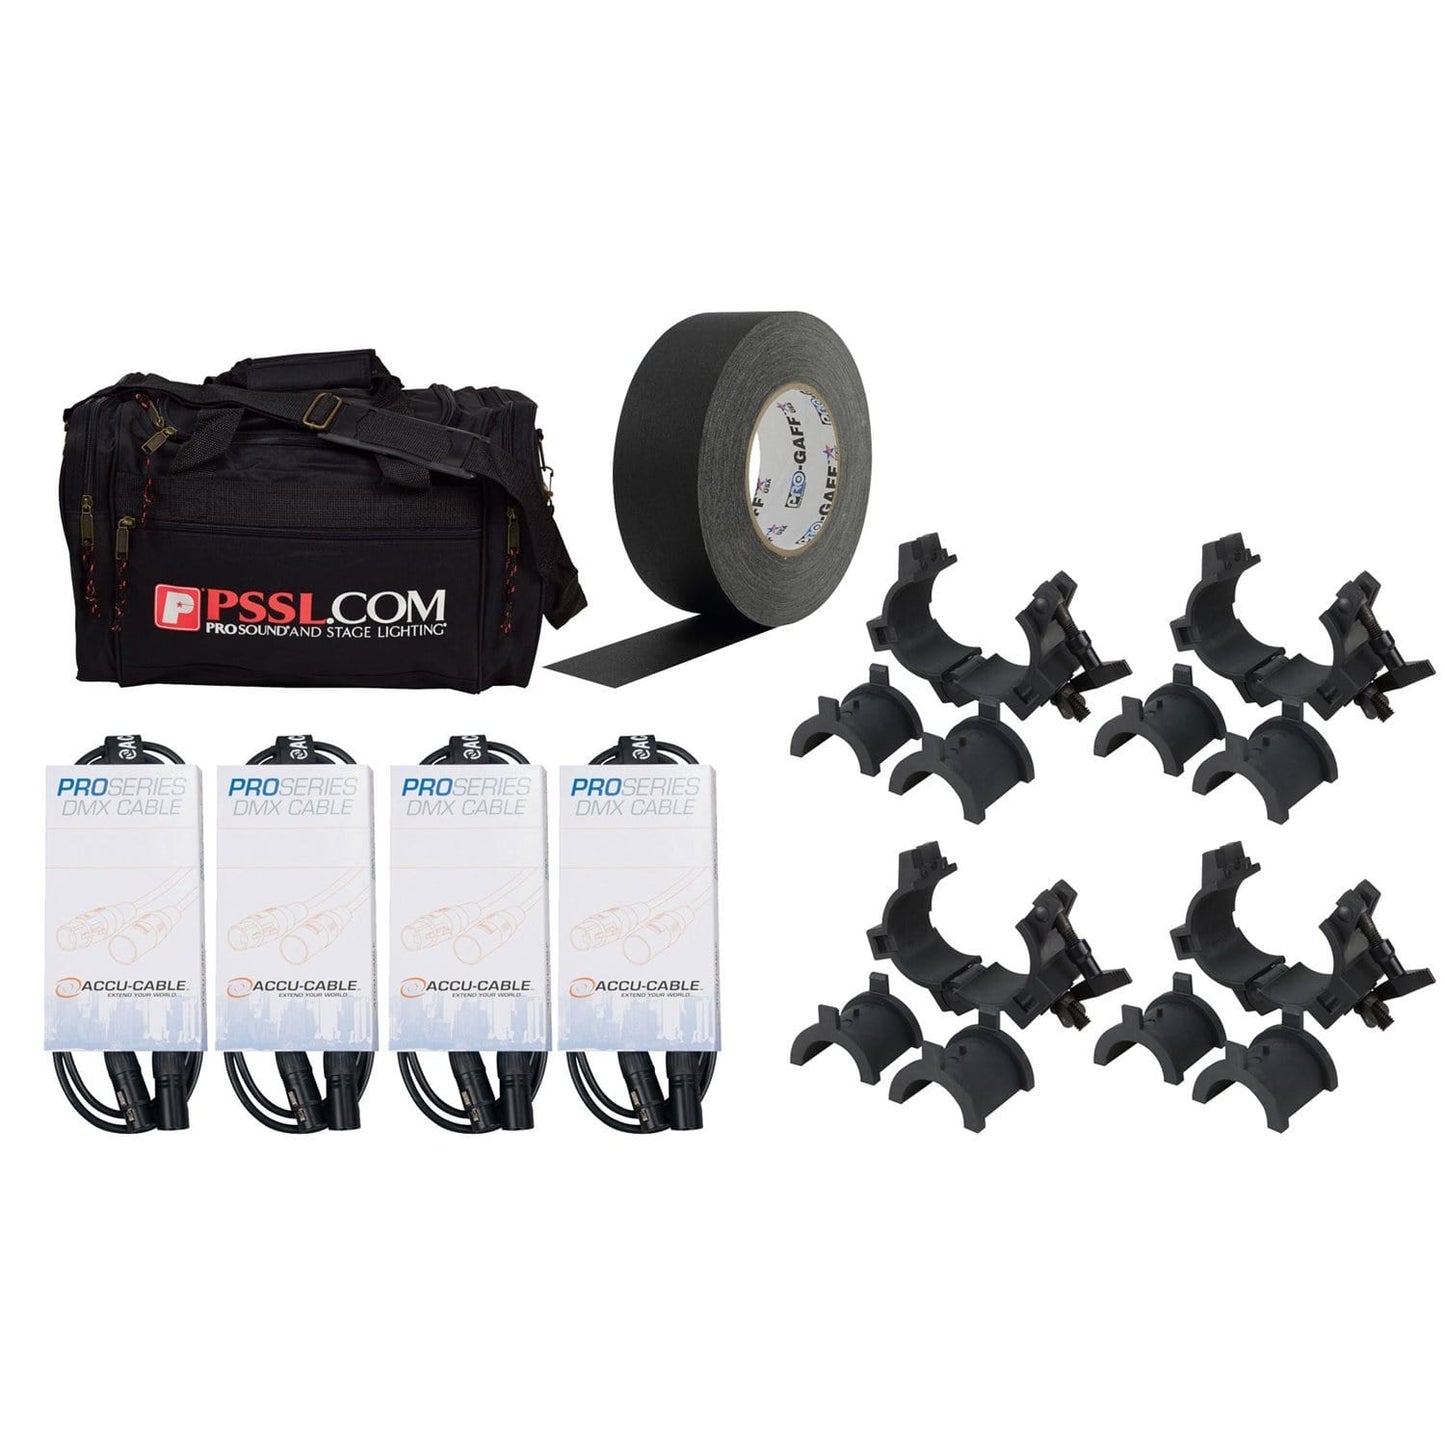 Lighting Essentials Pack with Clamps, Pro DMX Cables, Bag, & Gaffers Tape - PSSL ProSound and Stage Lighting